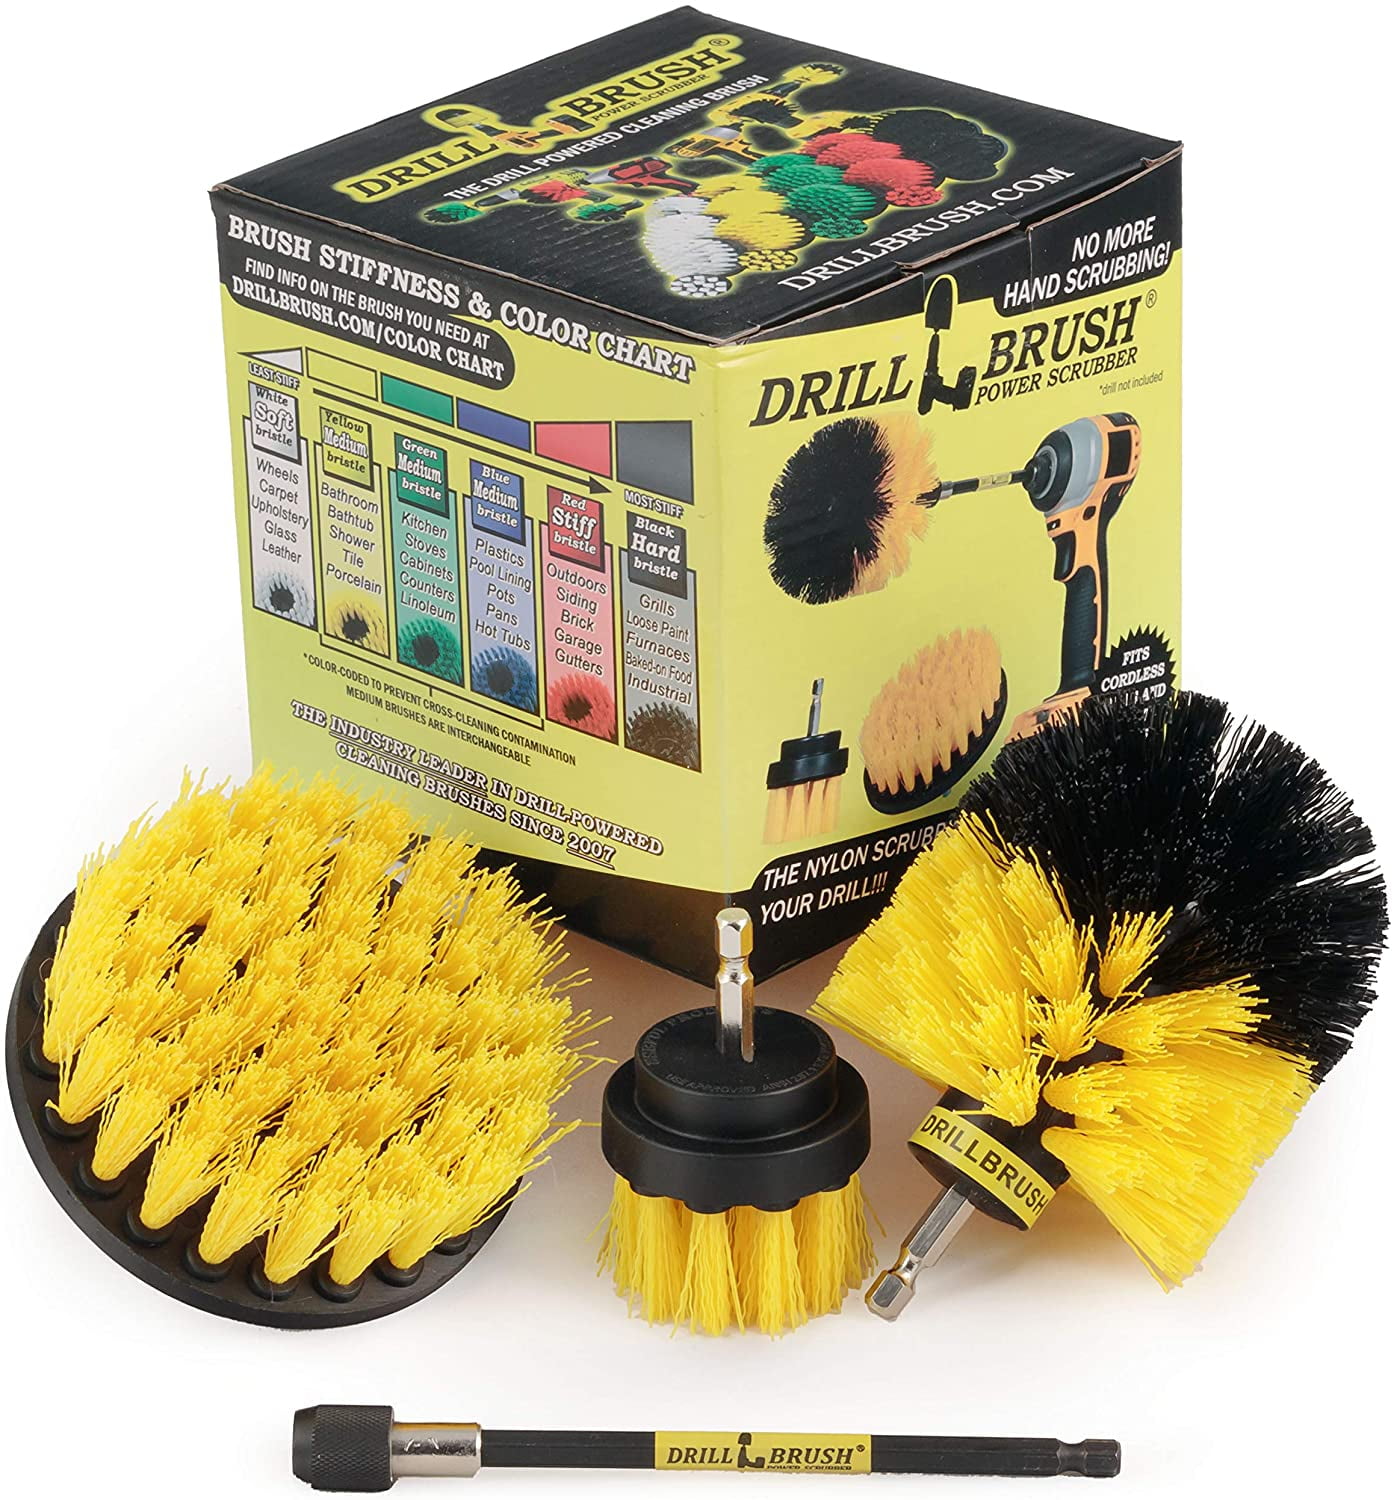 Drill Brush Power Scrubber Scumbusting Scrub Pad Bathroom Tile Cleaning Set New 